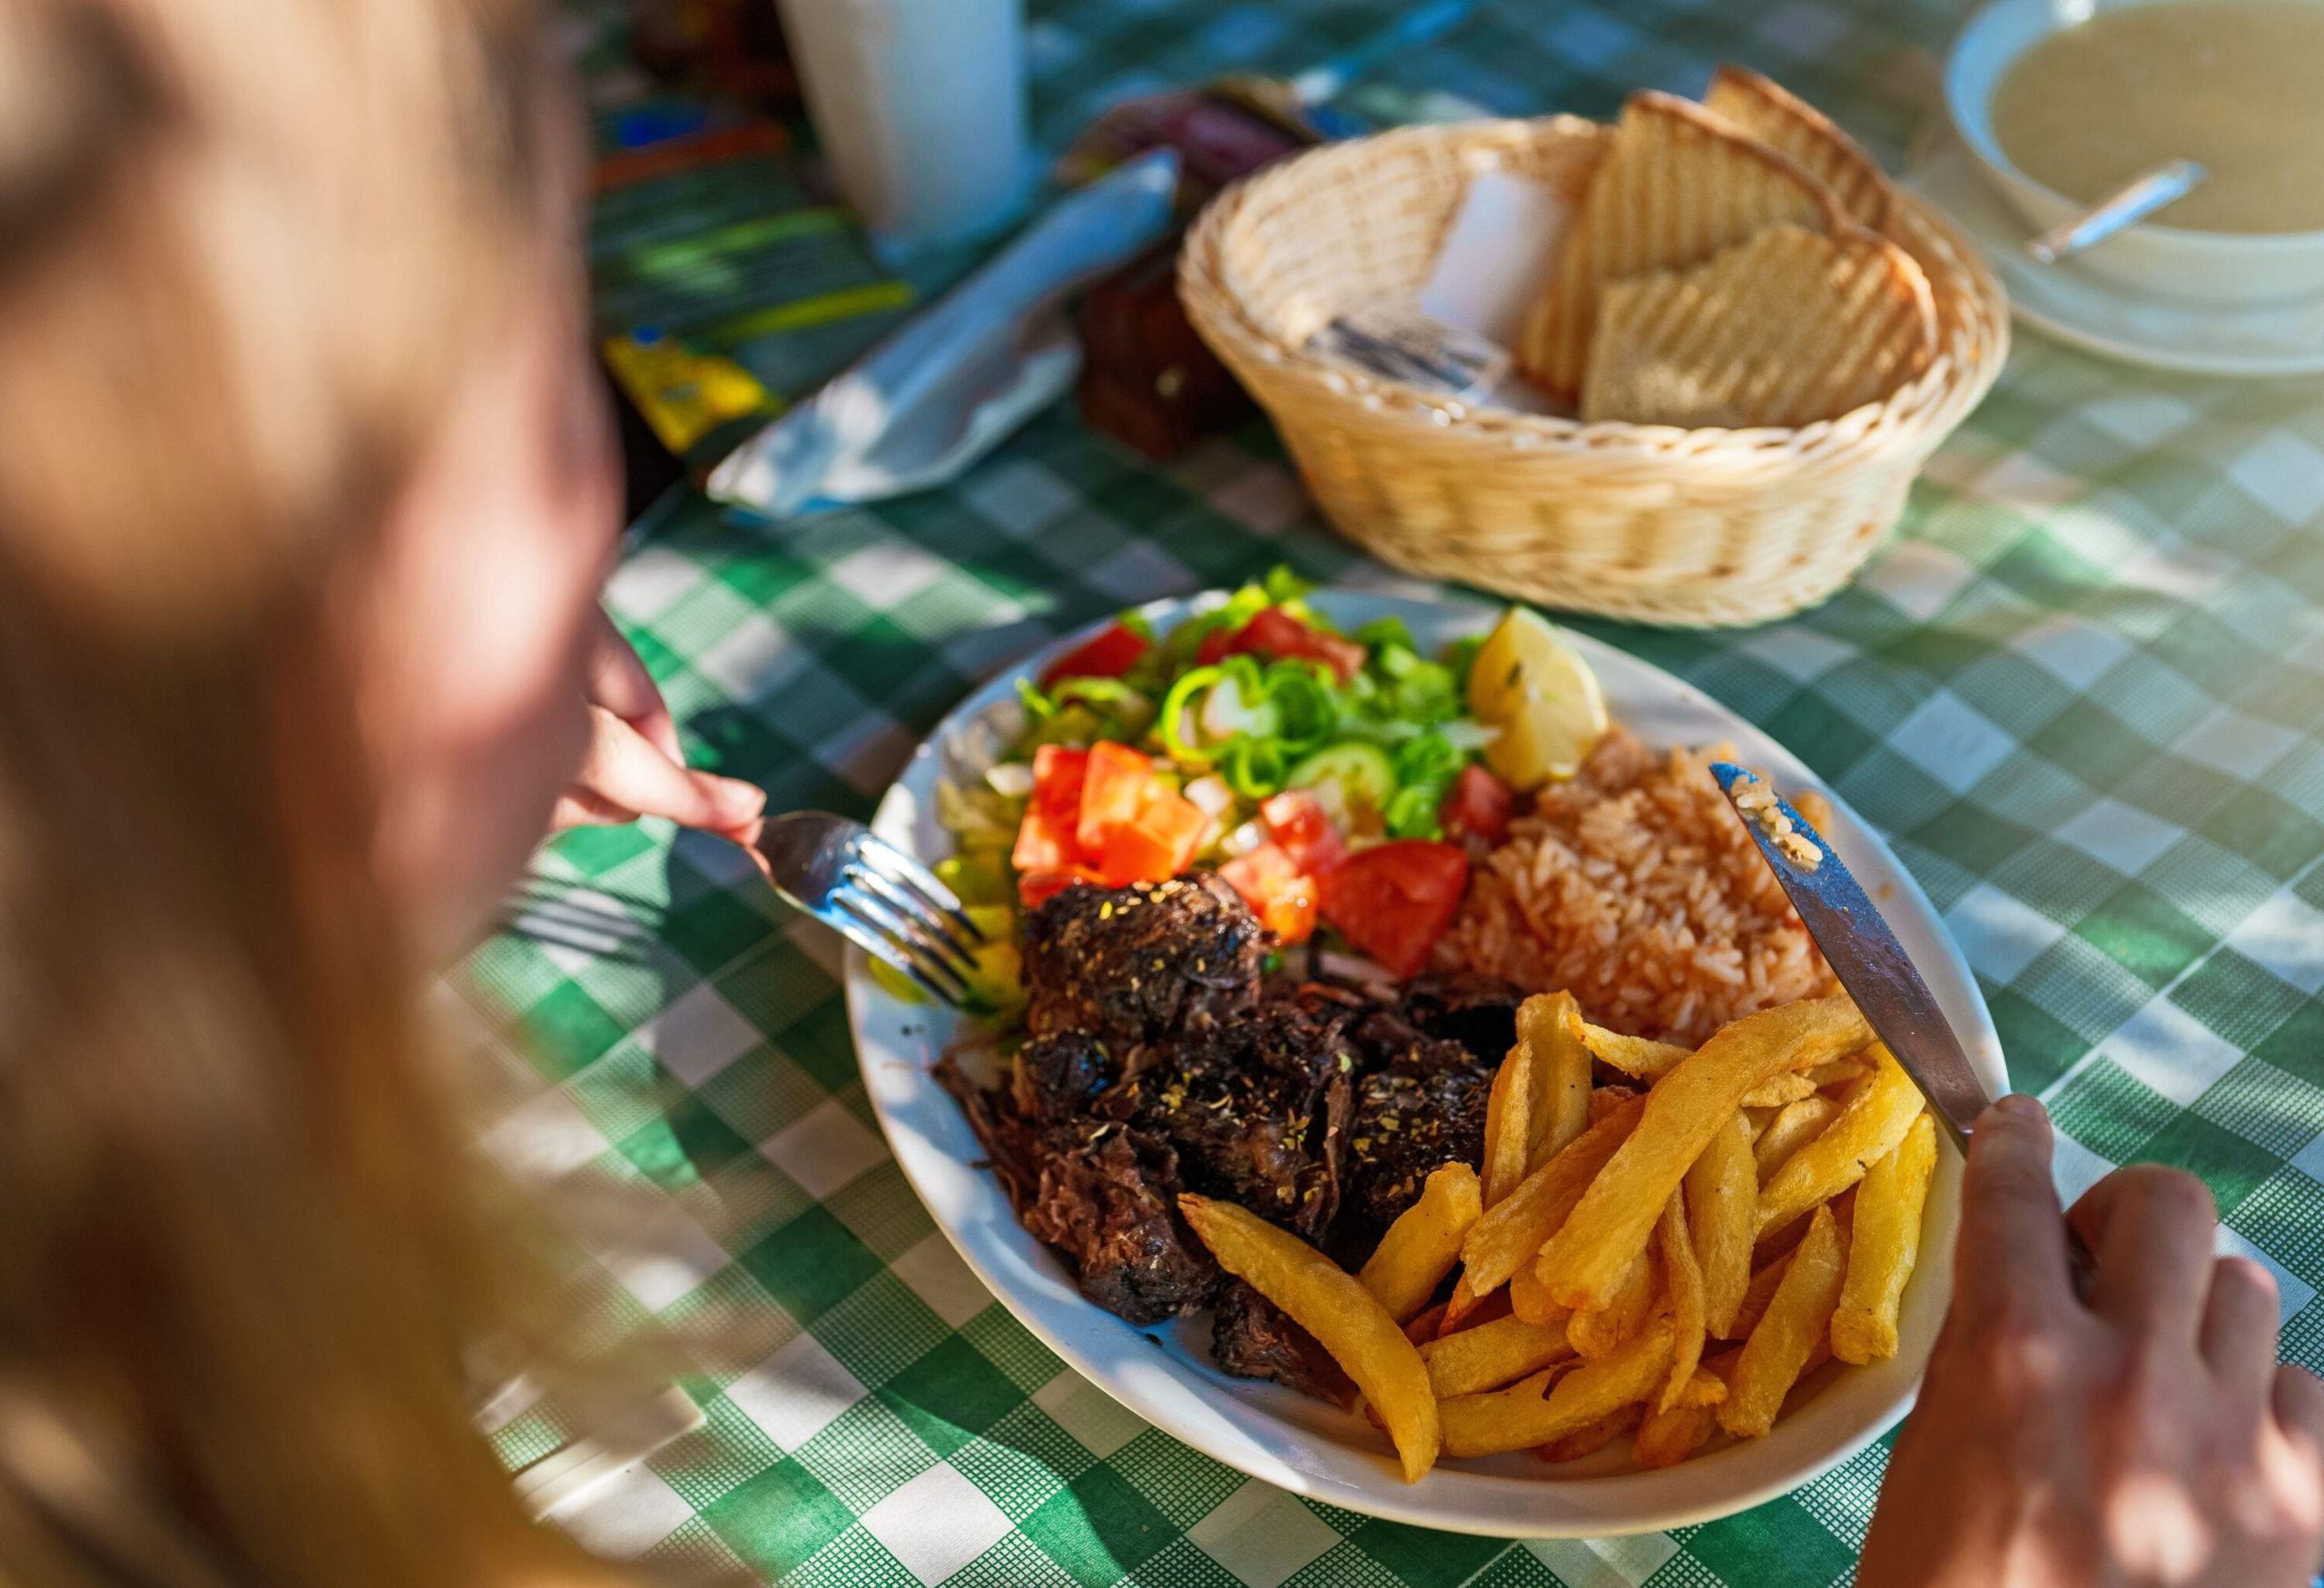 An individual eating a traditional Greek beef stifado with rice, french fries and vegetable salad on the side.